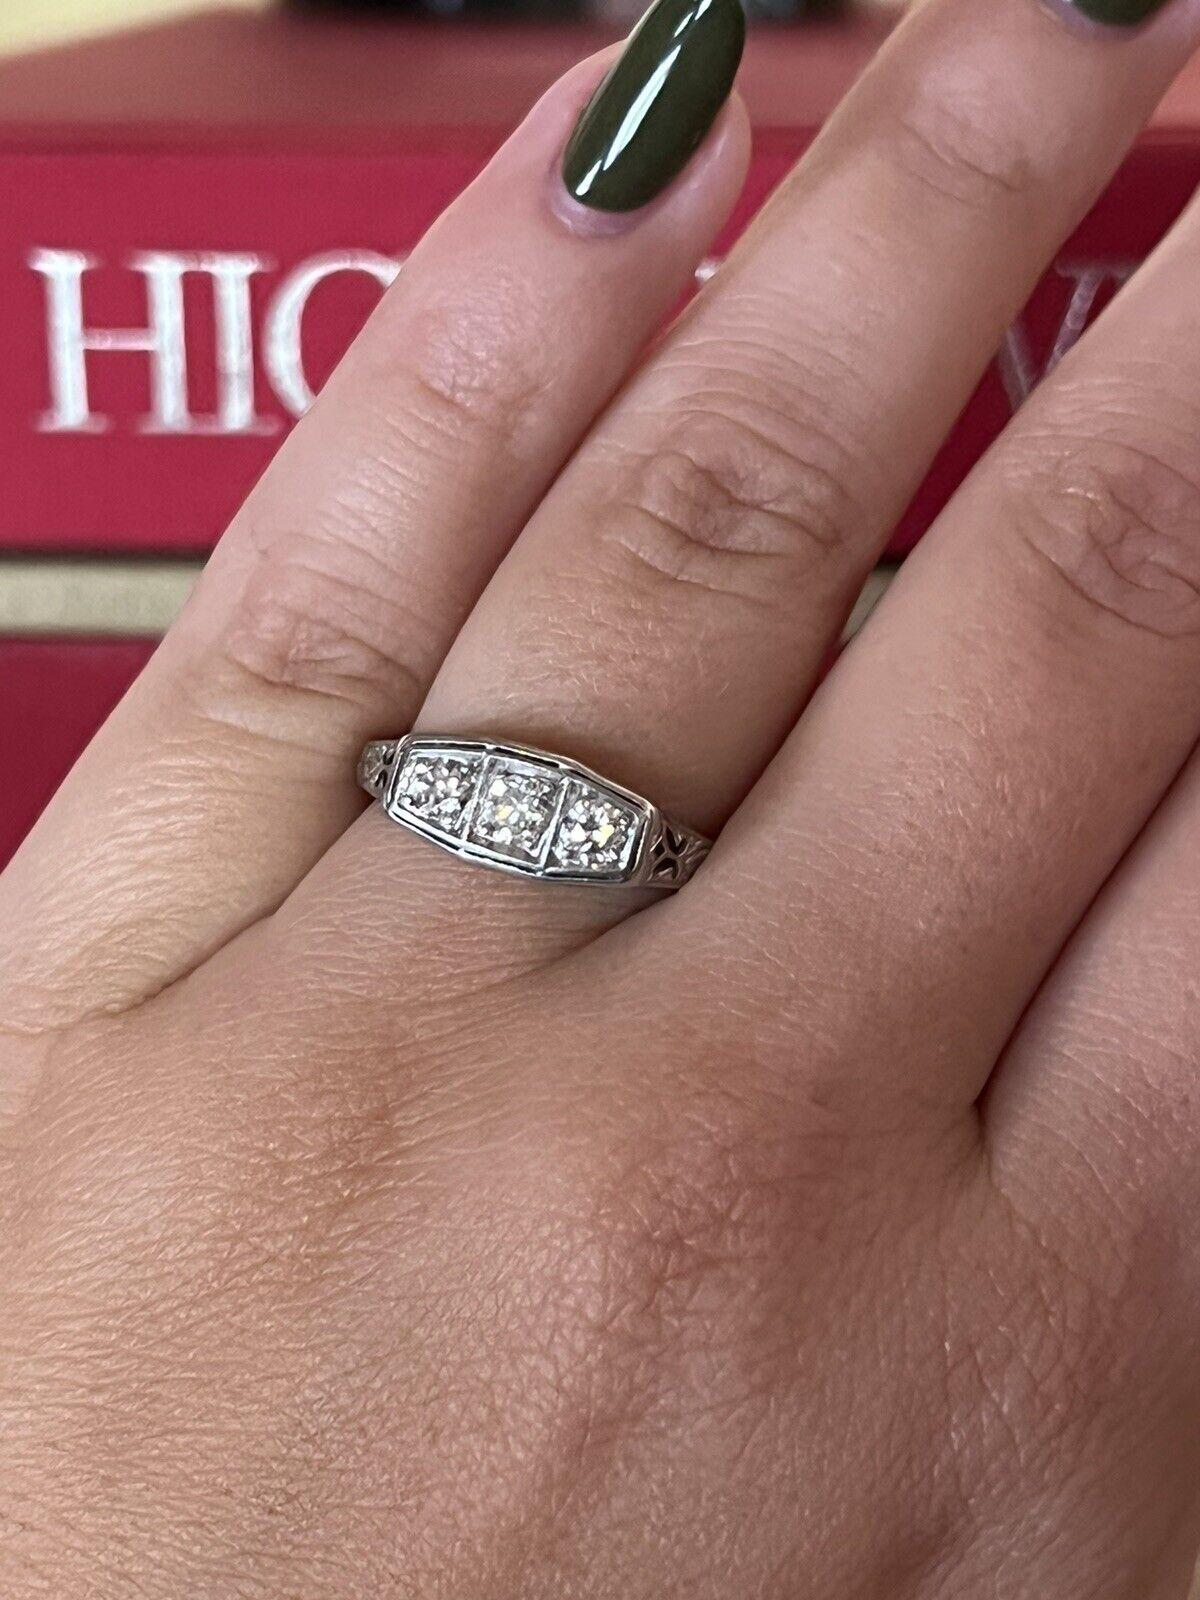 Tiffany & Co. Antique Platinum & Three Stone Diamond Engagement Ring Circa 1900s Rare

Here is your chance to purchase a beautiful and highly collectible designer ring.  Truly a great piece at a great price! 

The weight is 4.1 grams.  The ring size